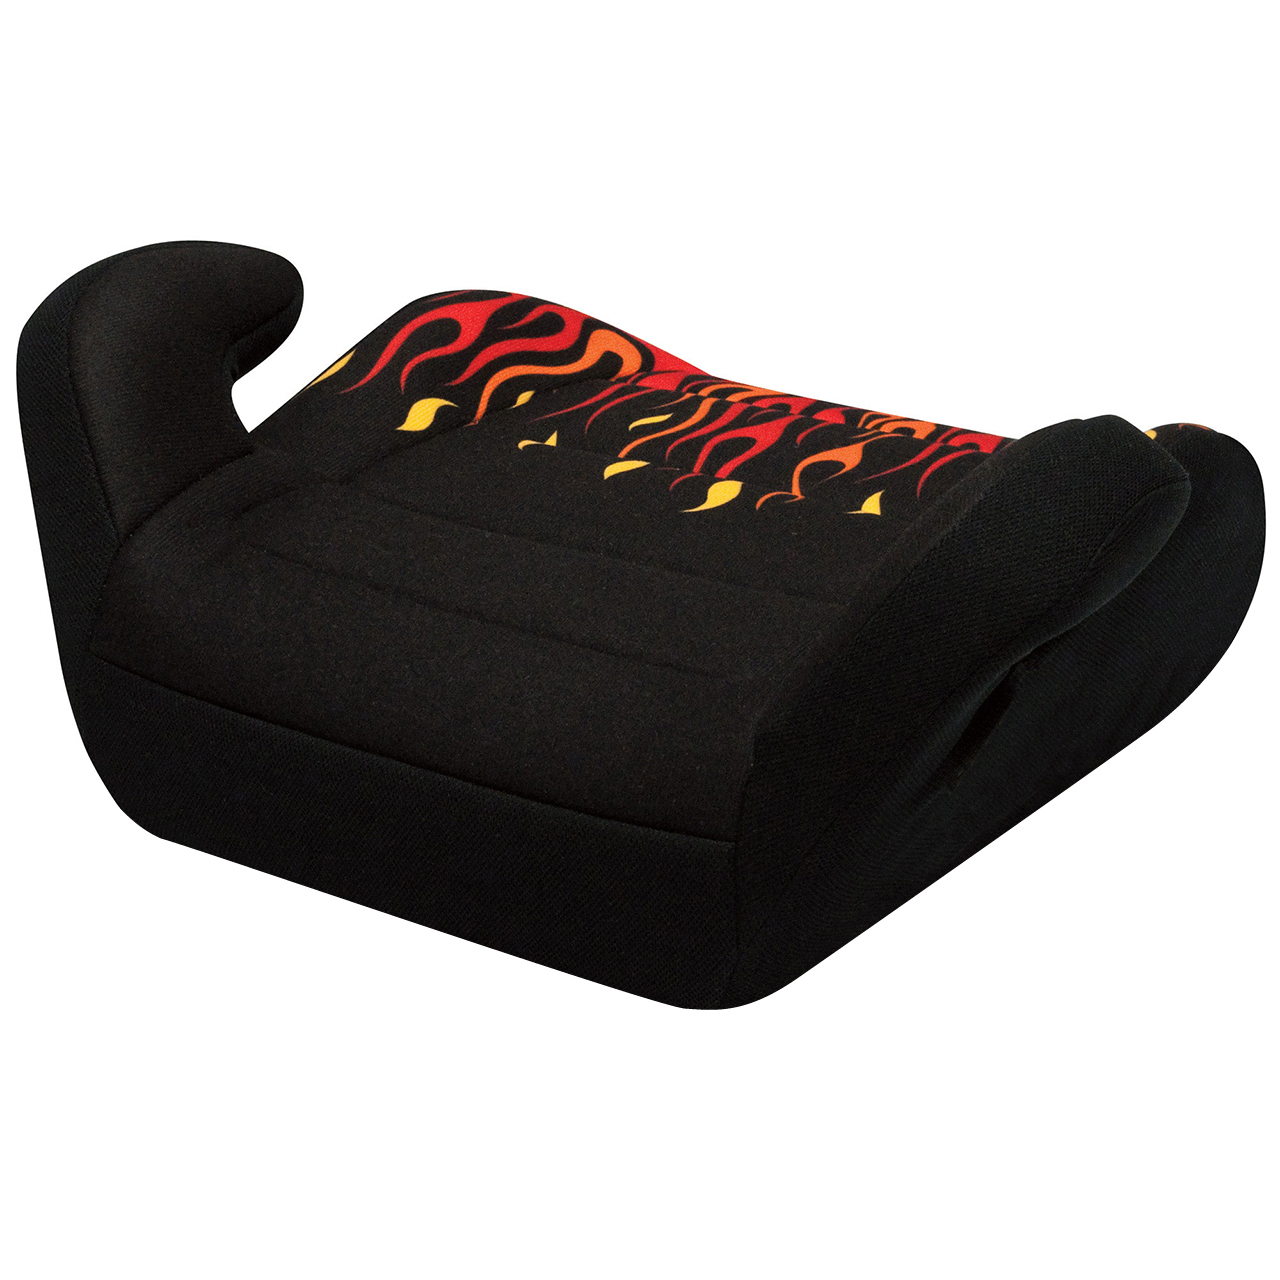 Harmony Juvenile Youth Backless Booster Car Seat, Flame Hot Rod - image 3 of 7